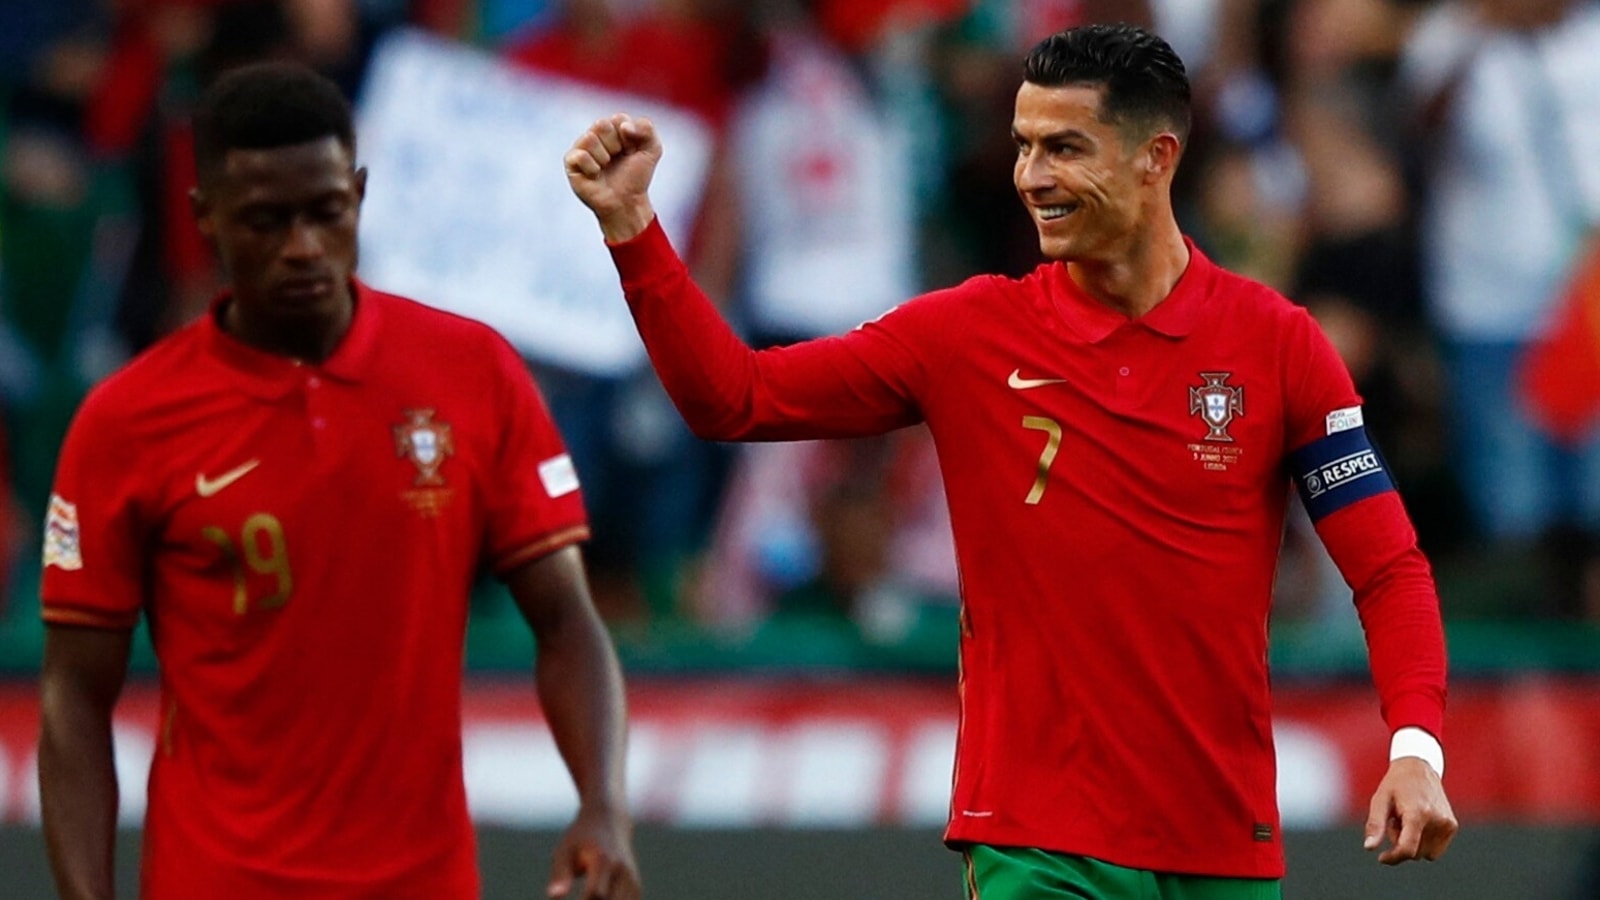 2022 portugal world cup jersey